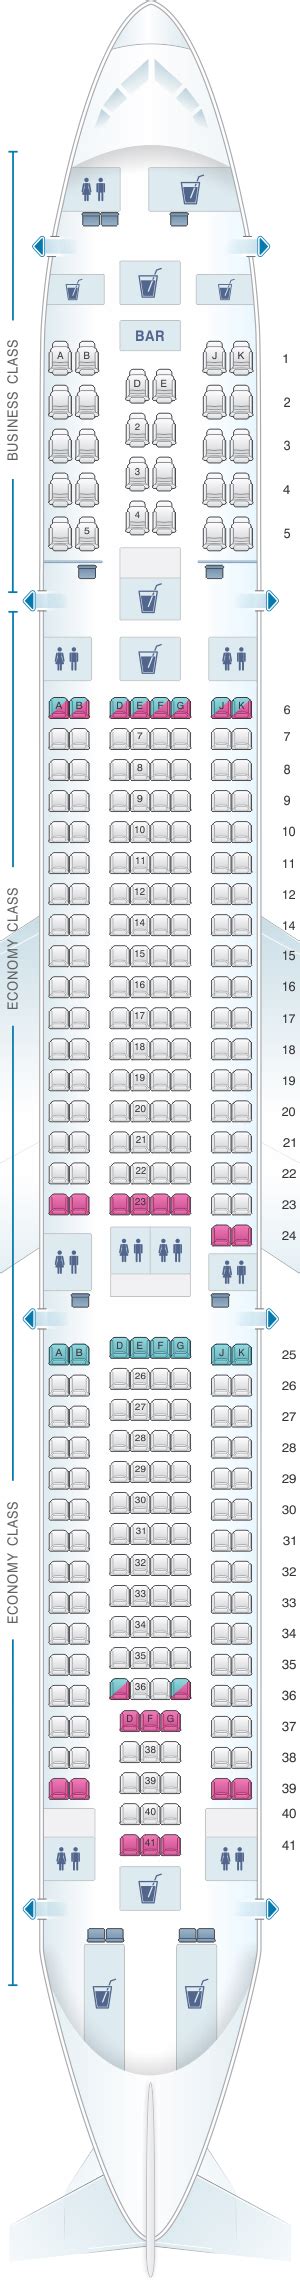 A Seat Map Turkish Airlines